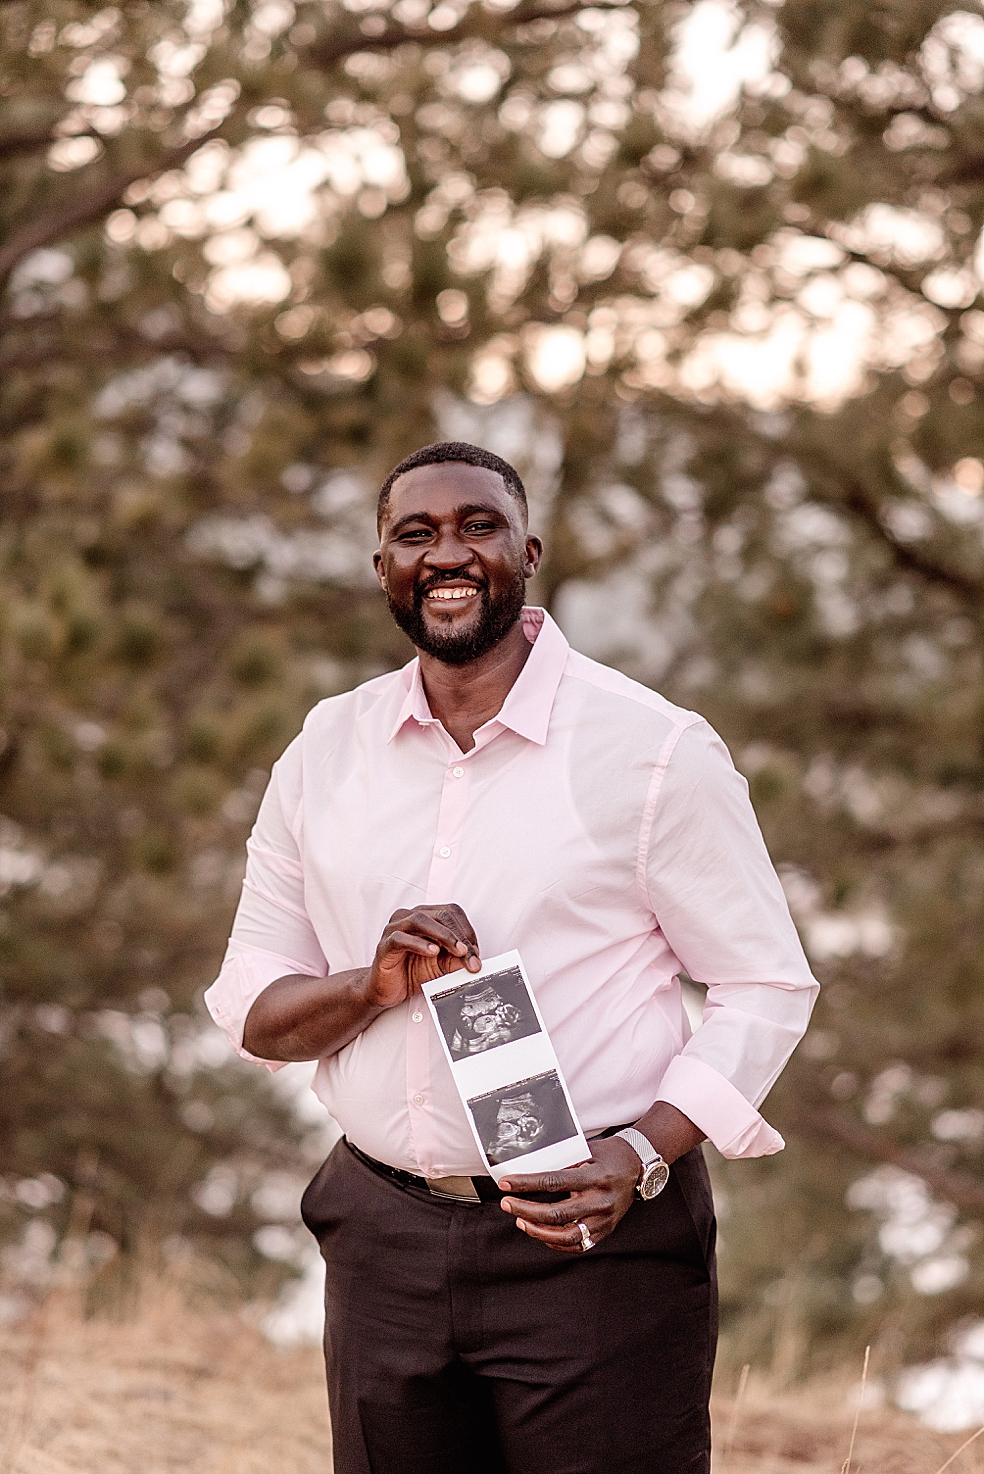 Dad to be holding sonogram photo | Photo by Jessica Lee Photography